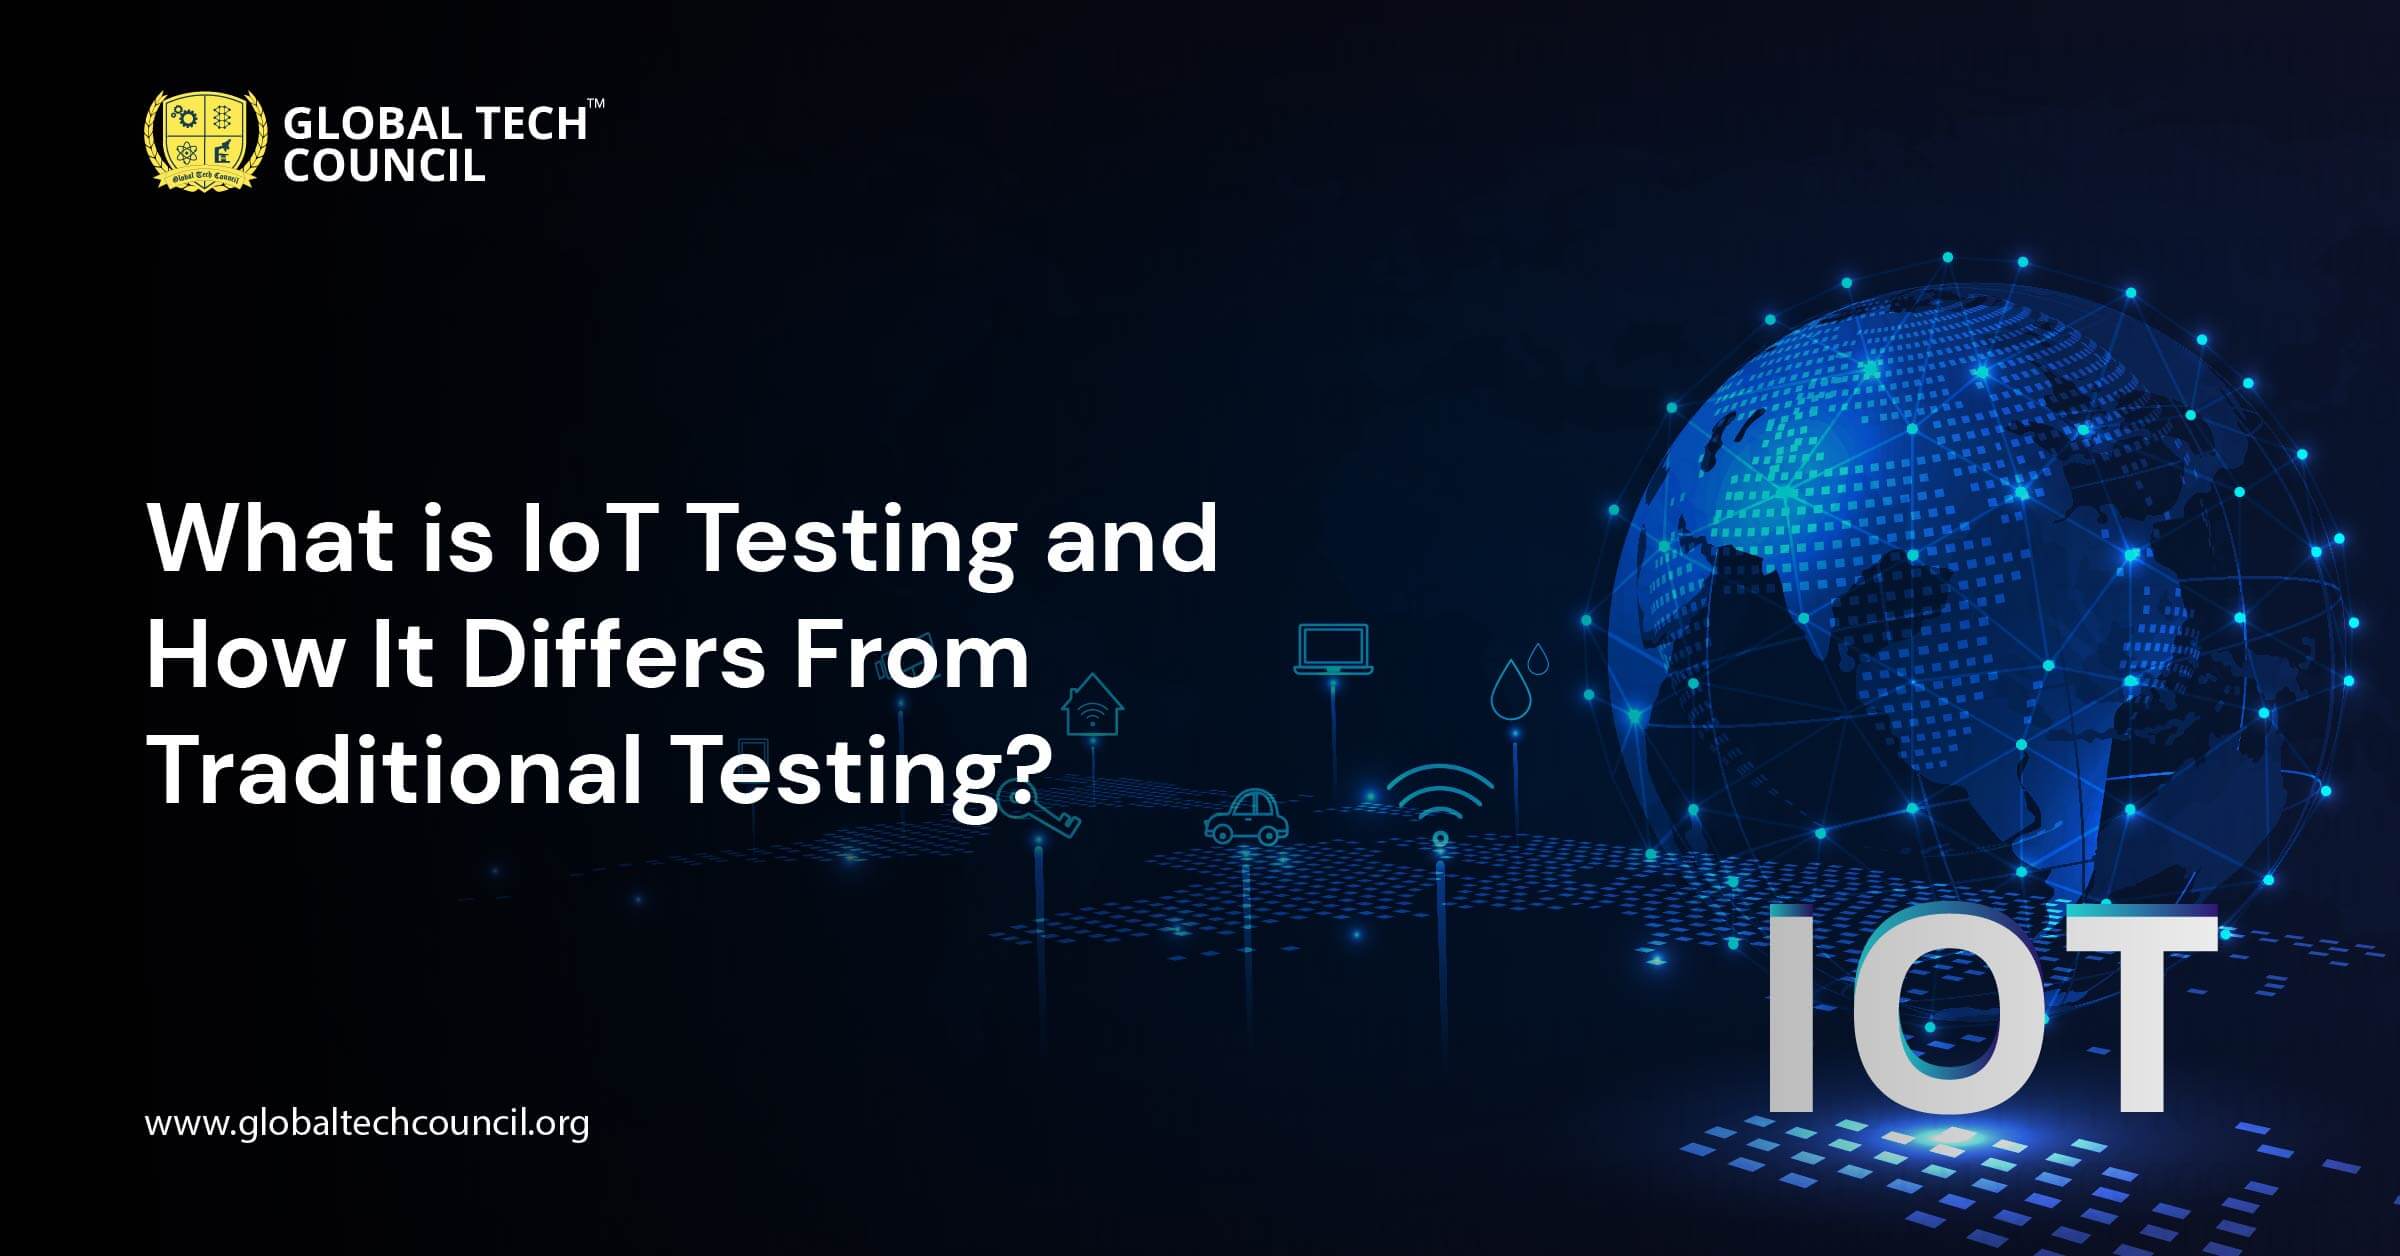 What is IoT Testing and How It Differs From Traditional Testing